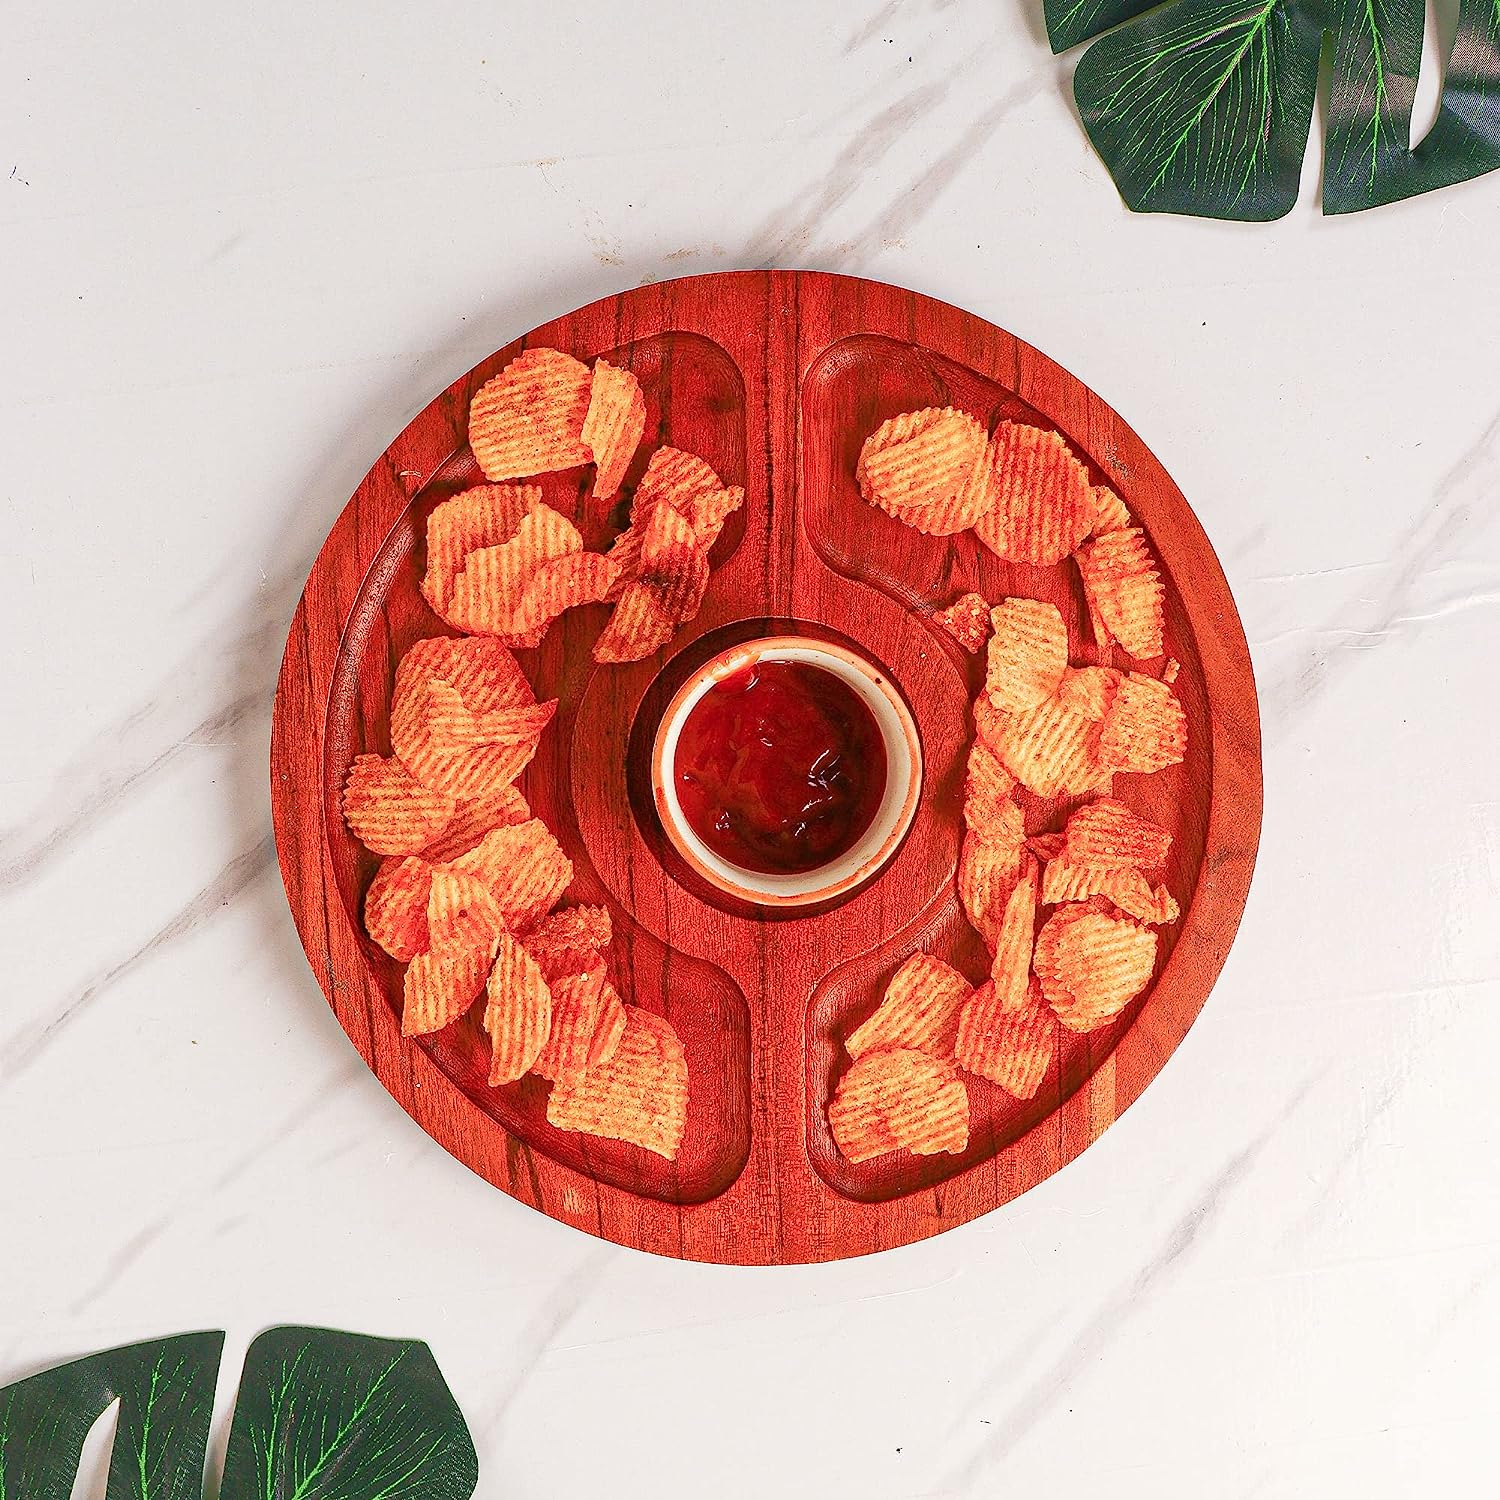 Round Wooden Serving Tray with Bowl, 1 pc Tray & Bowl, 10 Inch(25 * 25 CM), 1 Year Warranty.